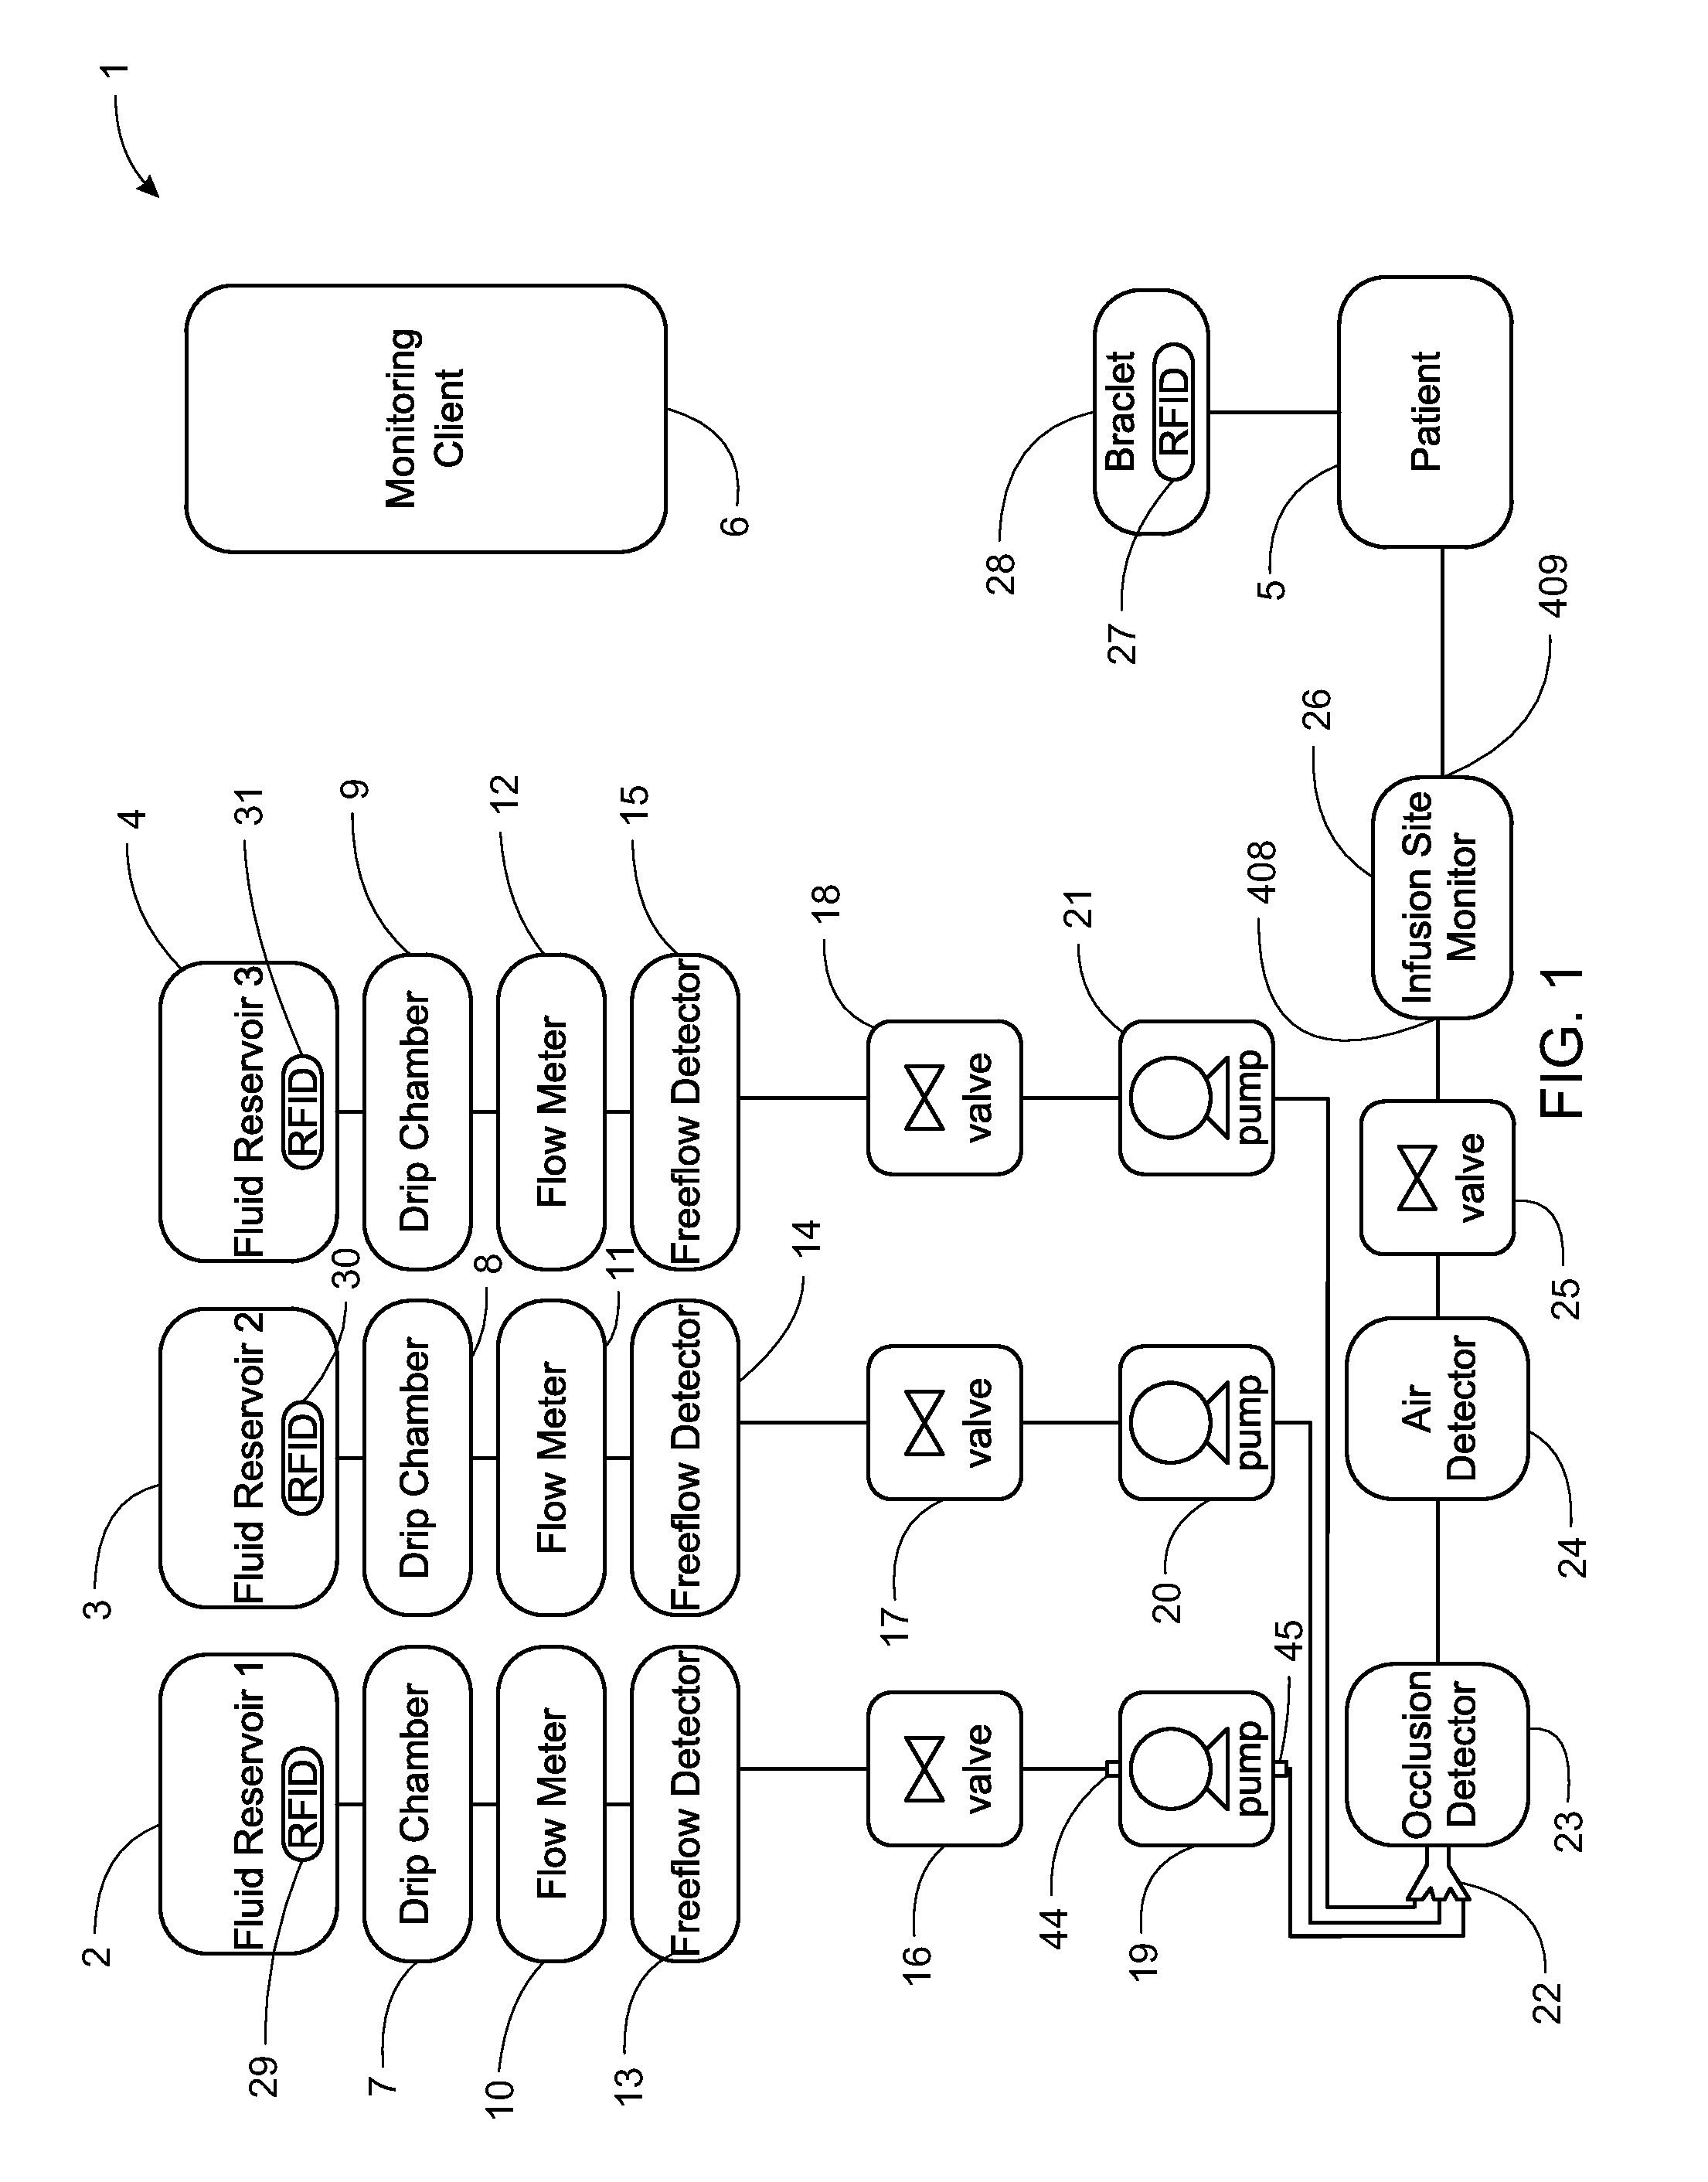 Apparatus for Infusing Fluid